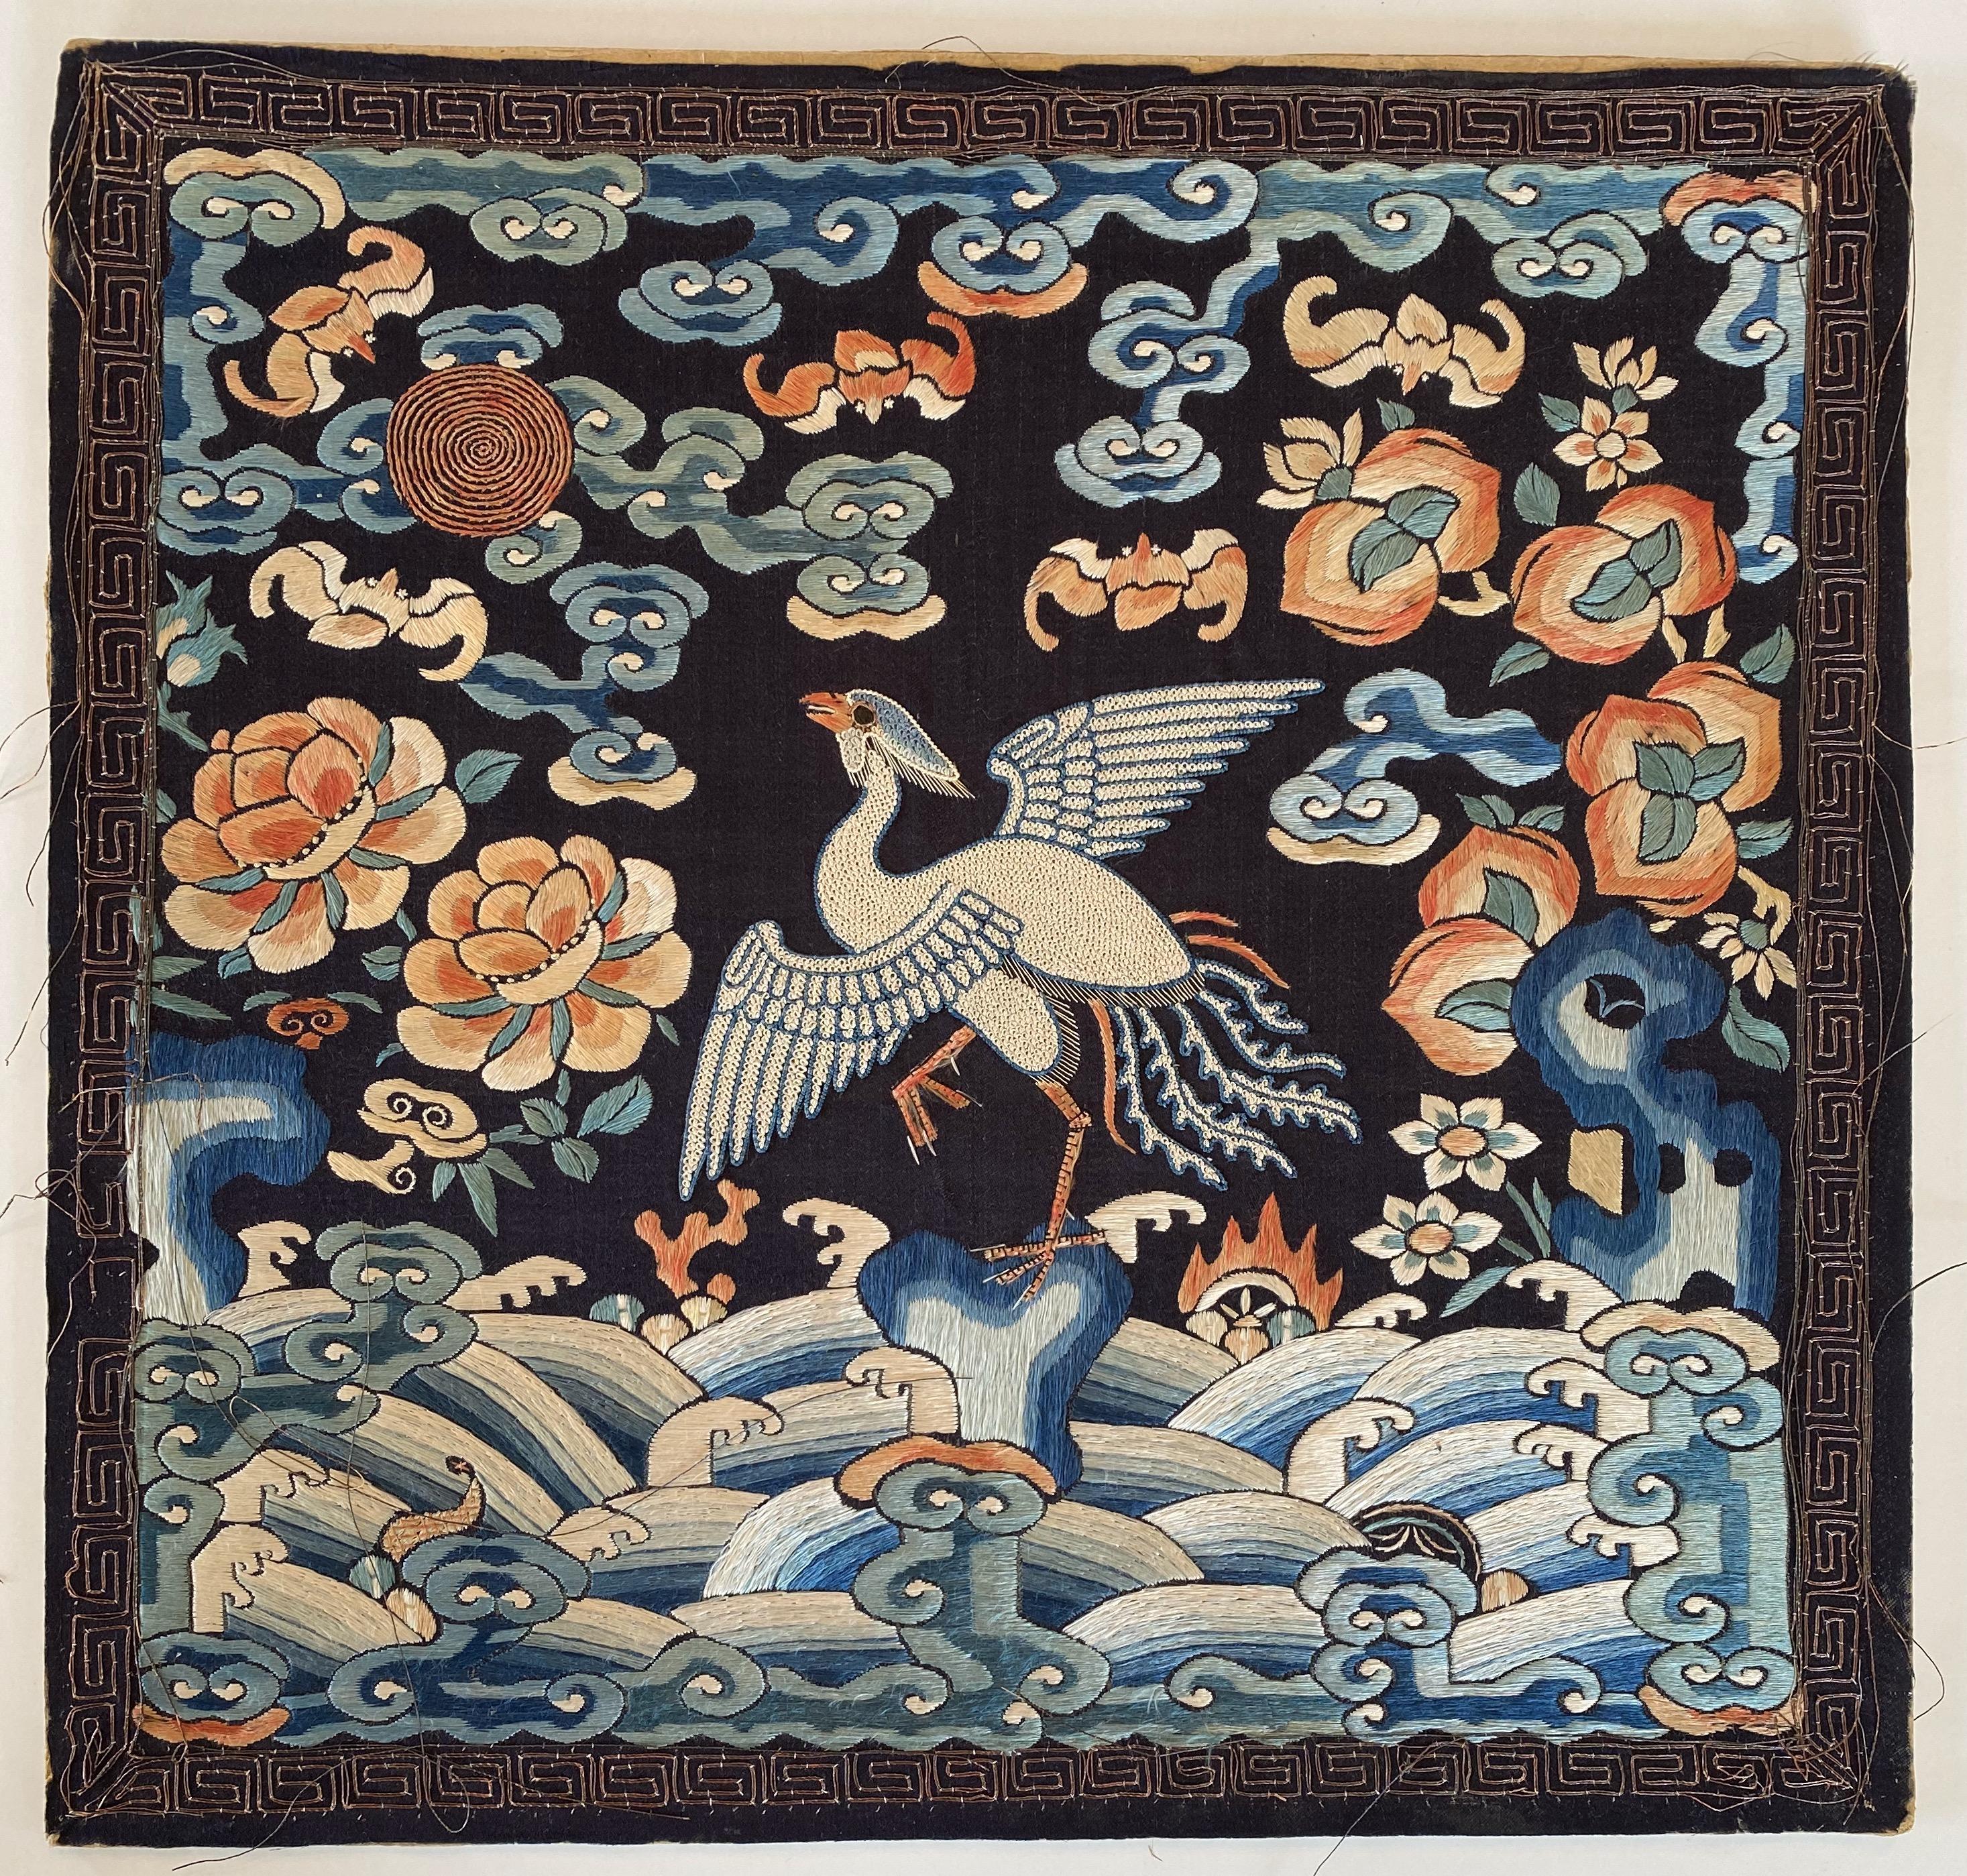 Qing Dynasty silk embroidery rank badge with silver pheasant.

This vividly-colored embroidery depicts a white pheasant on a dark blue background. The bird is shown with its wings outstretched, hovering above the sea. It faces a red-gold sun,